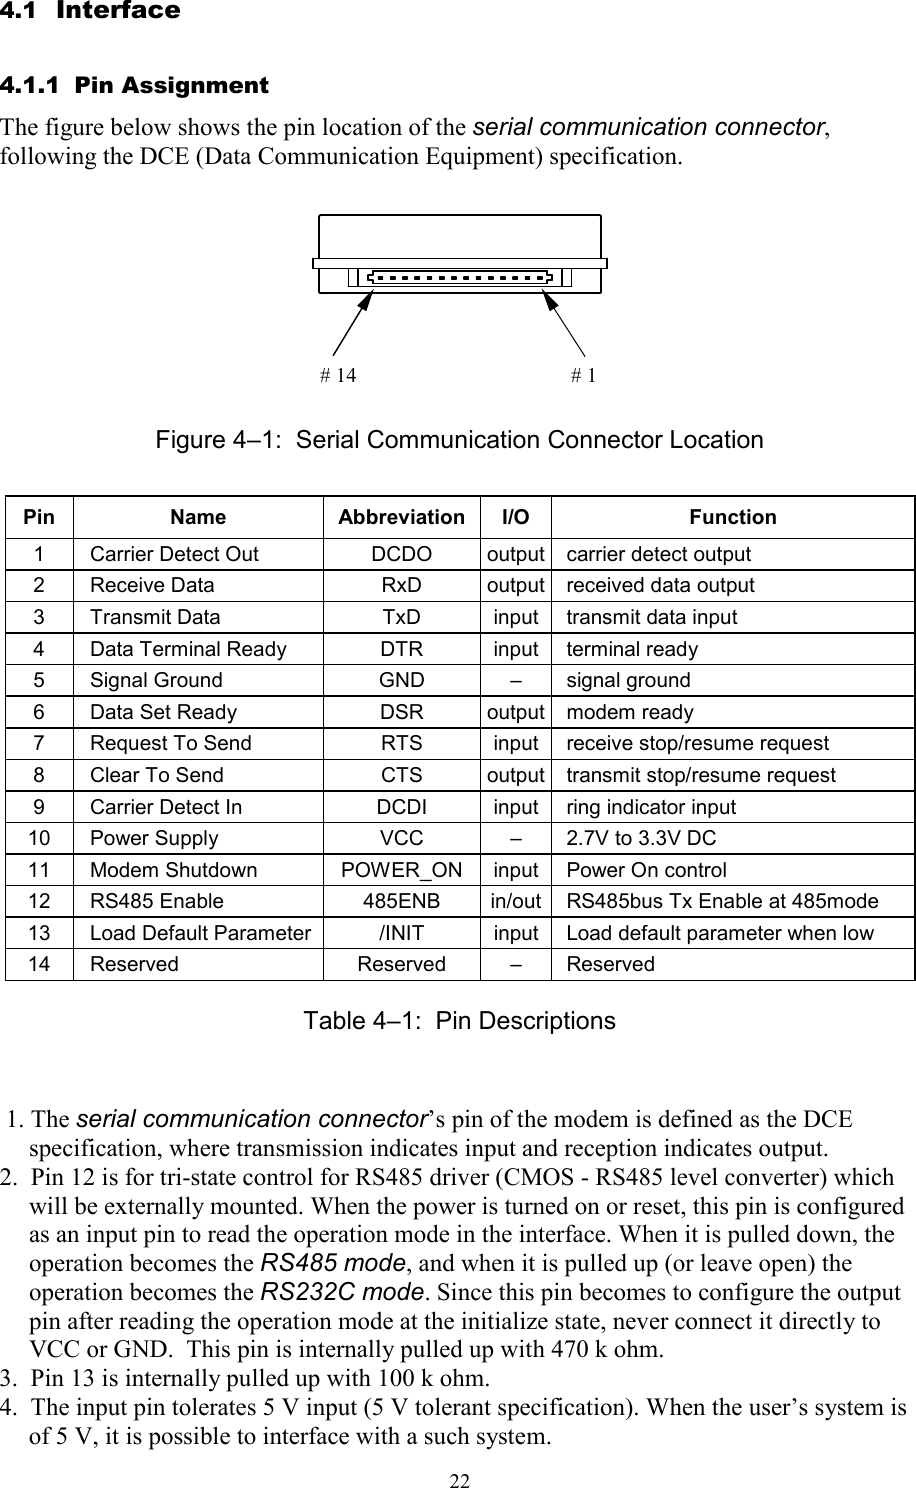   22 4.1  Interface 4.1.1  Pin Assignment The figure below shows the pin location of the serial communication connector, following the DCE (Data Communication Equipment) specification.           Figure 4–1:  Serial Communication Connector Location Pin Name  Abbreviation I/O  Function 1  Carrier Detect Out  DCDO  output  carrier detect output 2  Receive Data  RxD  output  received data output  3  Transmit Data  TxD  input  transmit data input  4  Data Terminal Ready  DTR  input  terminal ready 5  Signal Ground  GND  –  signal ground 6  Data Set Ready  DSR  output  modem ready 7  Request To Send  RTS  input  receive stop/resume request 8  Clear To Send  CTS  output  transmit stop/resume request 9  Carrier Detect In  DCDI  input  ring indicator input 10  Power Supply  VCC  –  2.7V to 3.3V DC 11  Modem Shutdown  POWER_ON input  Power On control 12  RS485 Enable  485ENB  in/out  RS485bus Tx Enable at 485mode 13  Load Default Parameter /INIT  input  Load default parameter when low 14  Reserved  Reserved  –  Reserved Table 4–1:  Pin Descriptions   1. The serial communication connector’s pin of the modem is defined as the DCE specification, where transmission indicates input and reception indicates output. 2.  Pin 12 is for tri-state control for RS485 driver (CMOS - RS485 level converter) which will be externally mounted. When the power is turned on or reset, this pin is configured as an input pin to read the operation mode in the interface. When it is pulled down, the operation becomes the RS485 mode, and when it is pulled up (or leave open) the operation becomes the RS232C mode. Since this pin becomes to configure the output pin after reading the operation mode at the initialize state, never connect it directly to VCC or GND.  This pin is internally pulled up with 470 k ohm. 3.  Pin 13 is internally pulled up with 100 k ohm. 4.  The input pin tolerates 5 V input (5 V tolerant specification). When the user’s system is of 5 V, it is possible to interface with a such system. # 1 # 14 